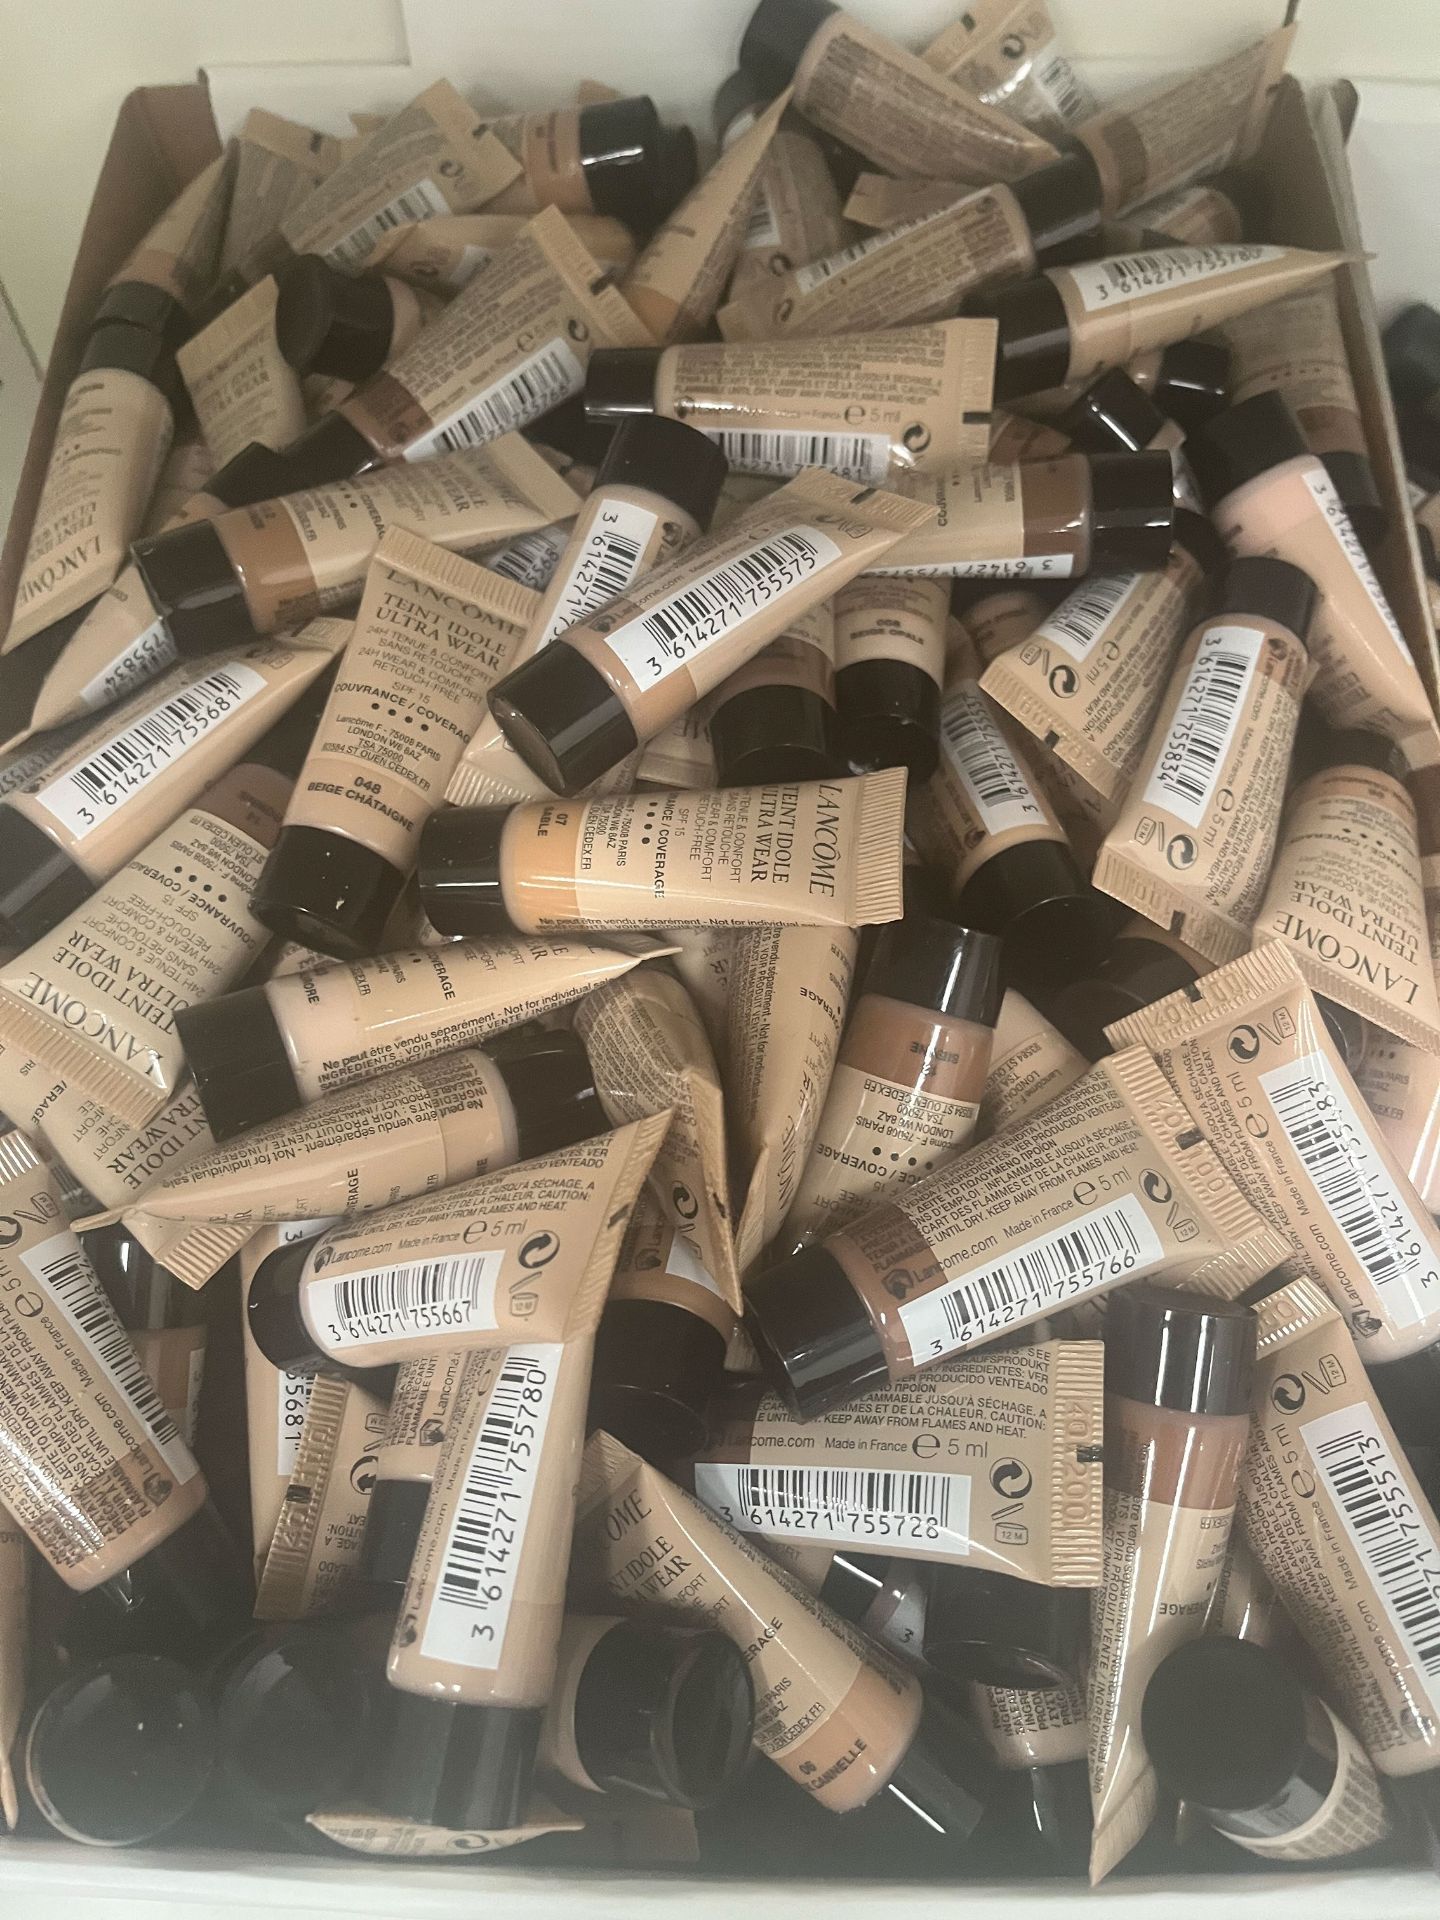 A Selection of Lancôme Foundation Testers - 5ml bottles - Image 2 of 5